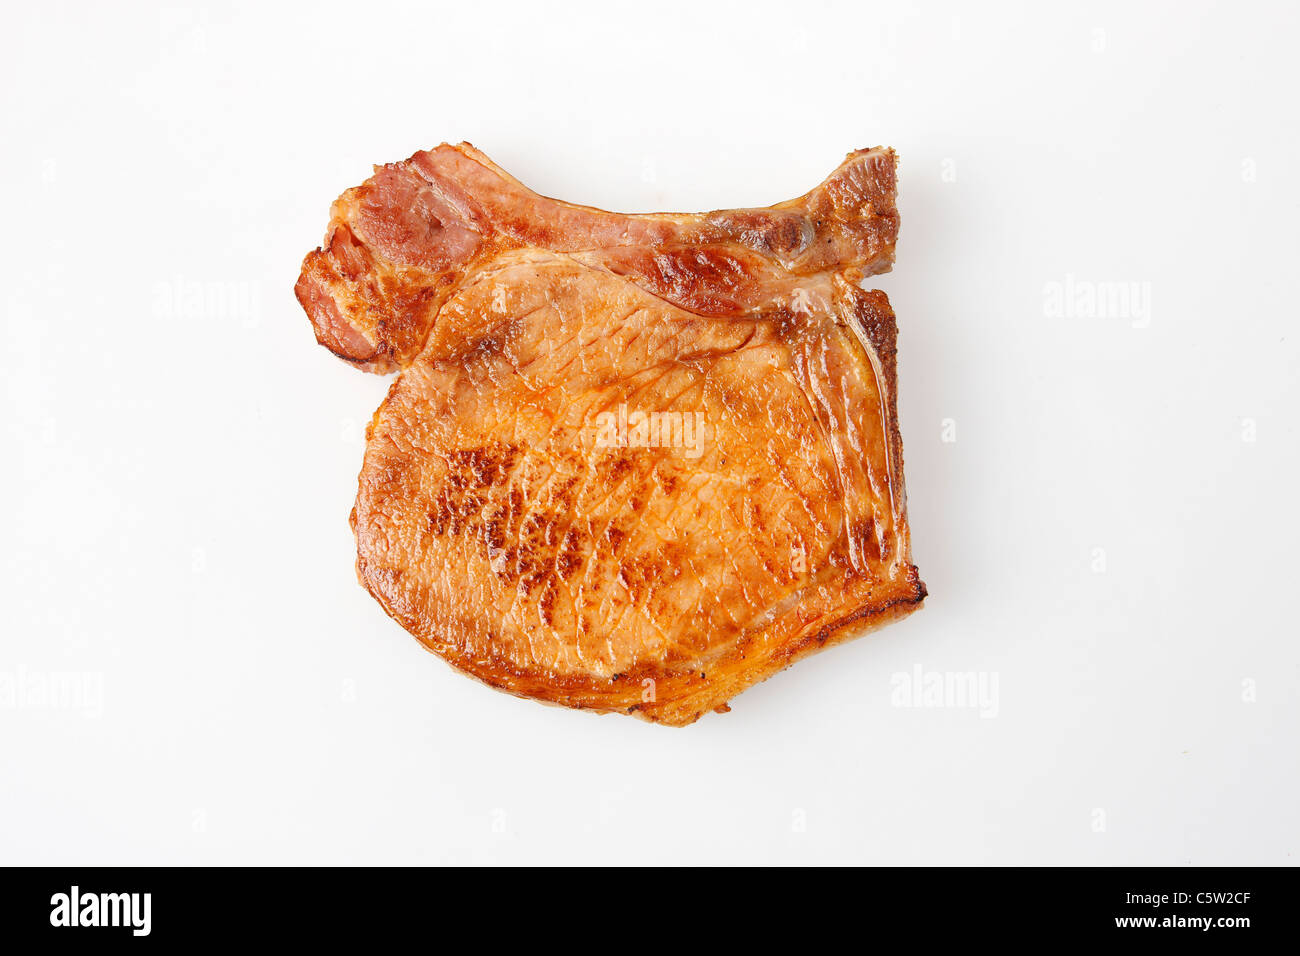 Pork chop, elevated view Stock Photo